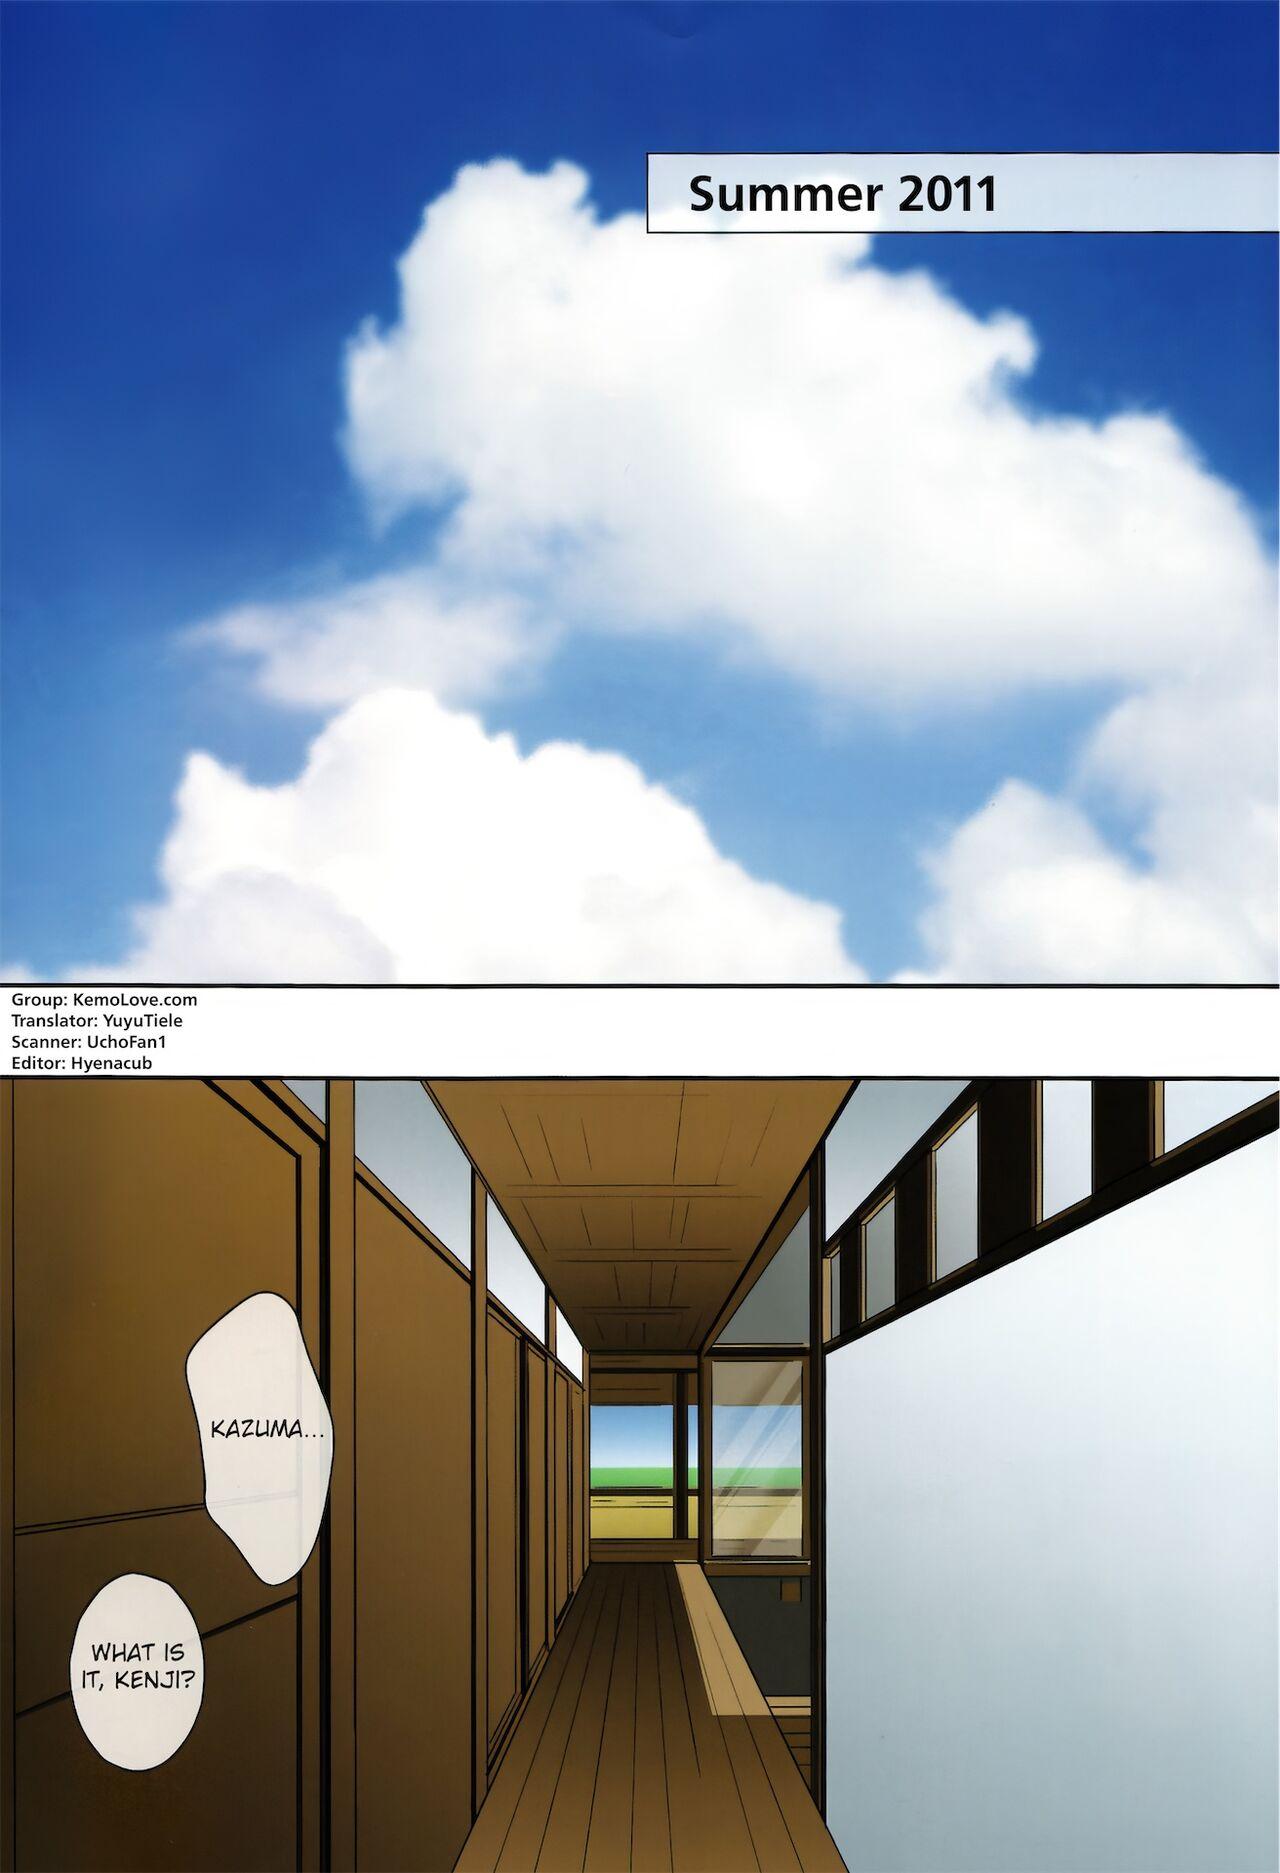 Menage One Year After - Summer wars Oralsex - Picture 2